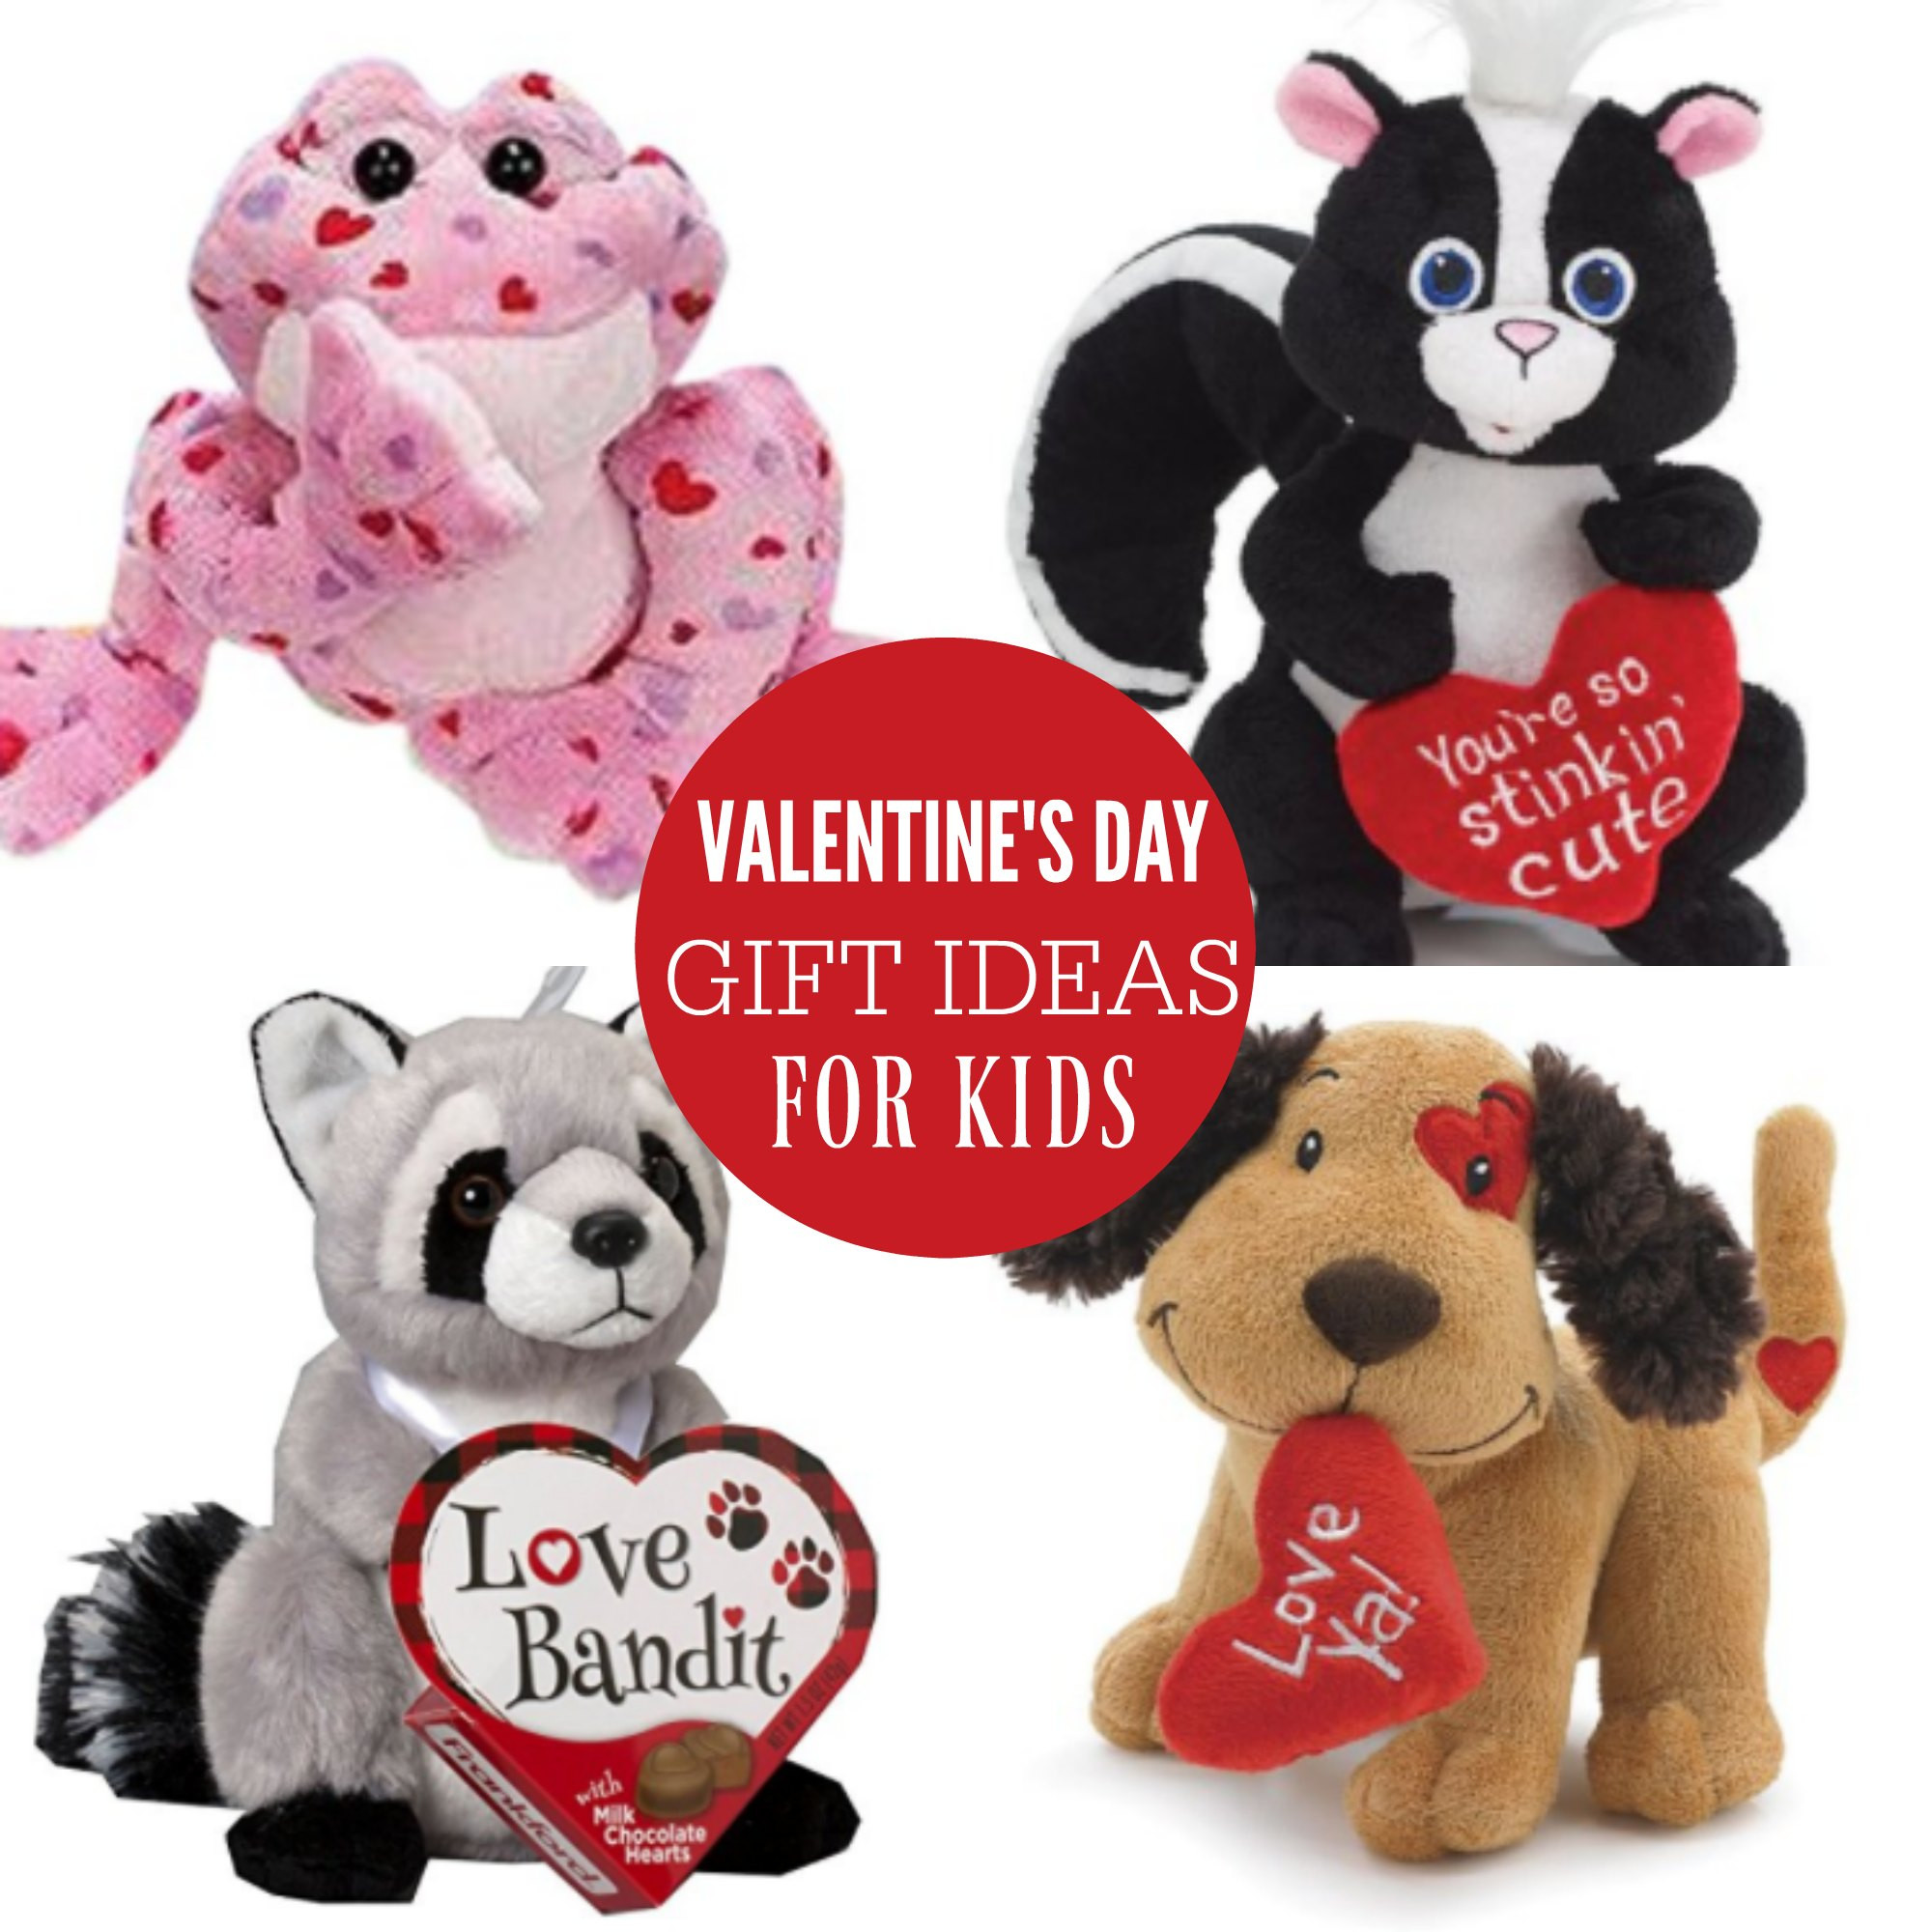 Childrens Valentines Gift Ideas
 Valentine Gift ideas for Kids That they will love e